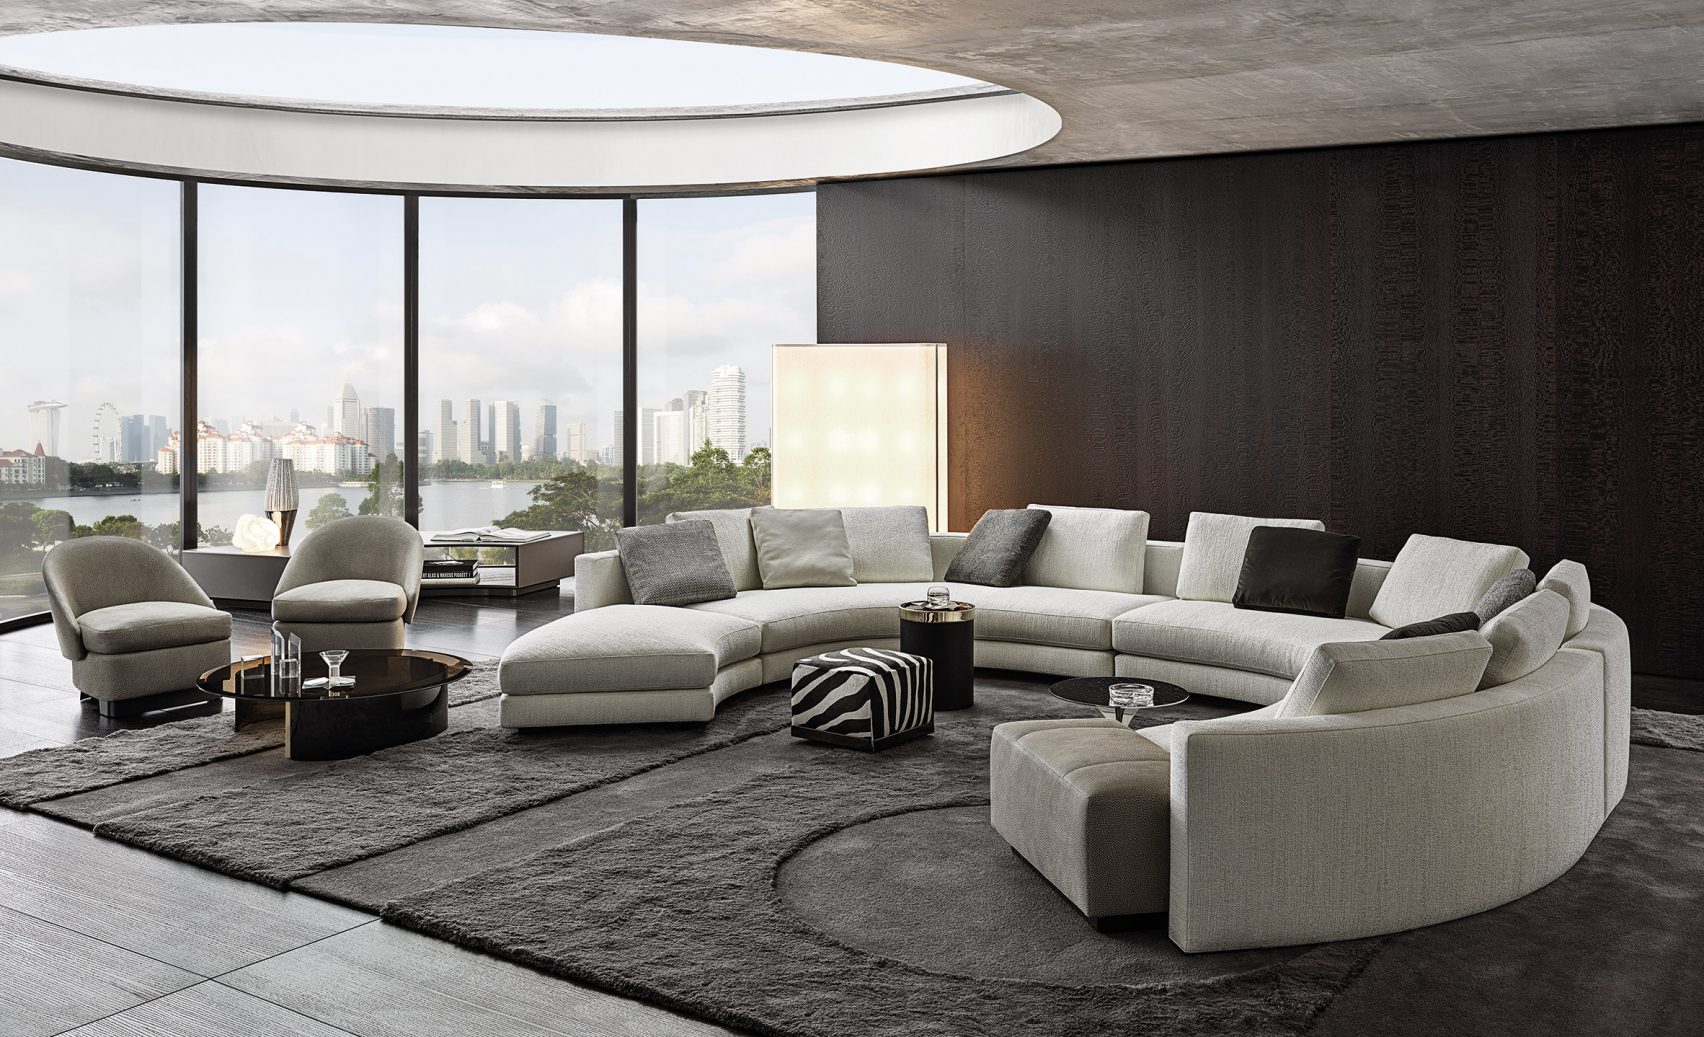 iSaloni 2019's Highlights You Don't Want to Miss - Daniel Sofa - Minotti isaloni 2019 iSaloni 2019&#8217;s Highlights You Don&#8217;t Want to Miss iSaloni 2019s Highlights You Dont Want to Miss Daniel Sofa Minotti